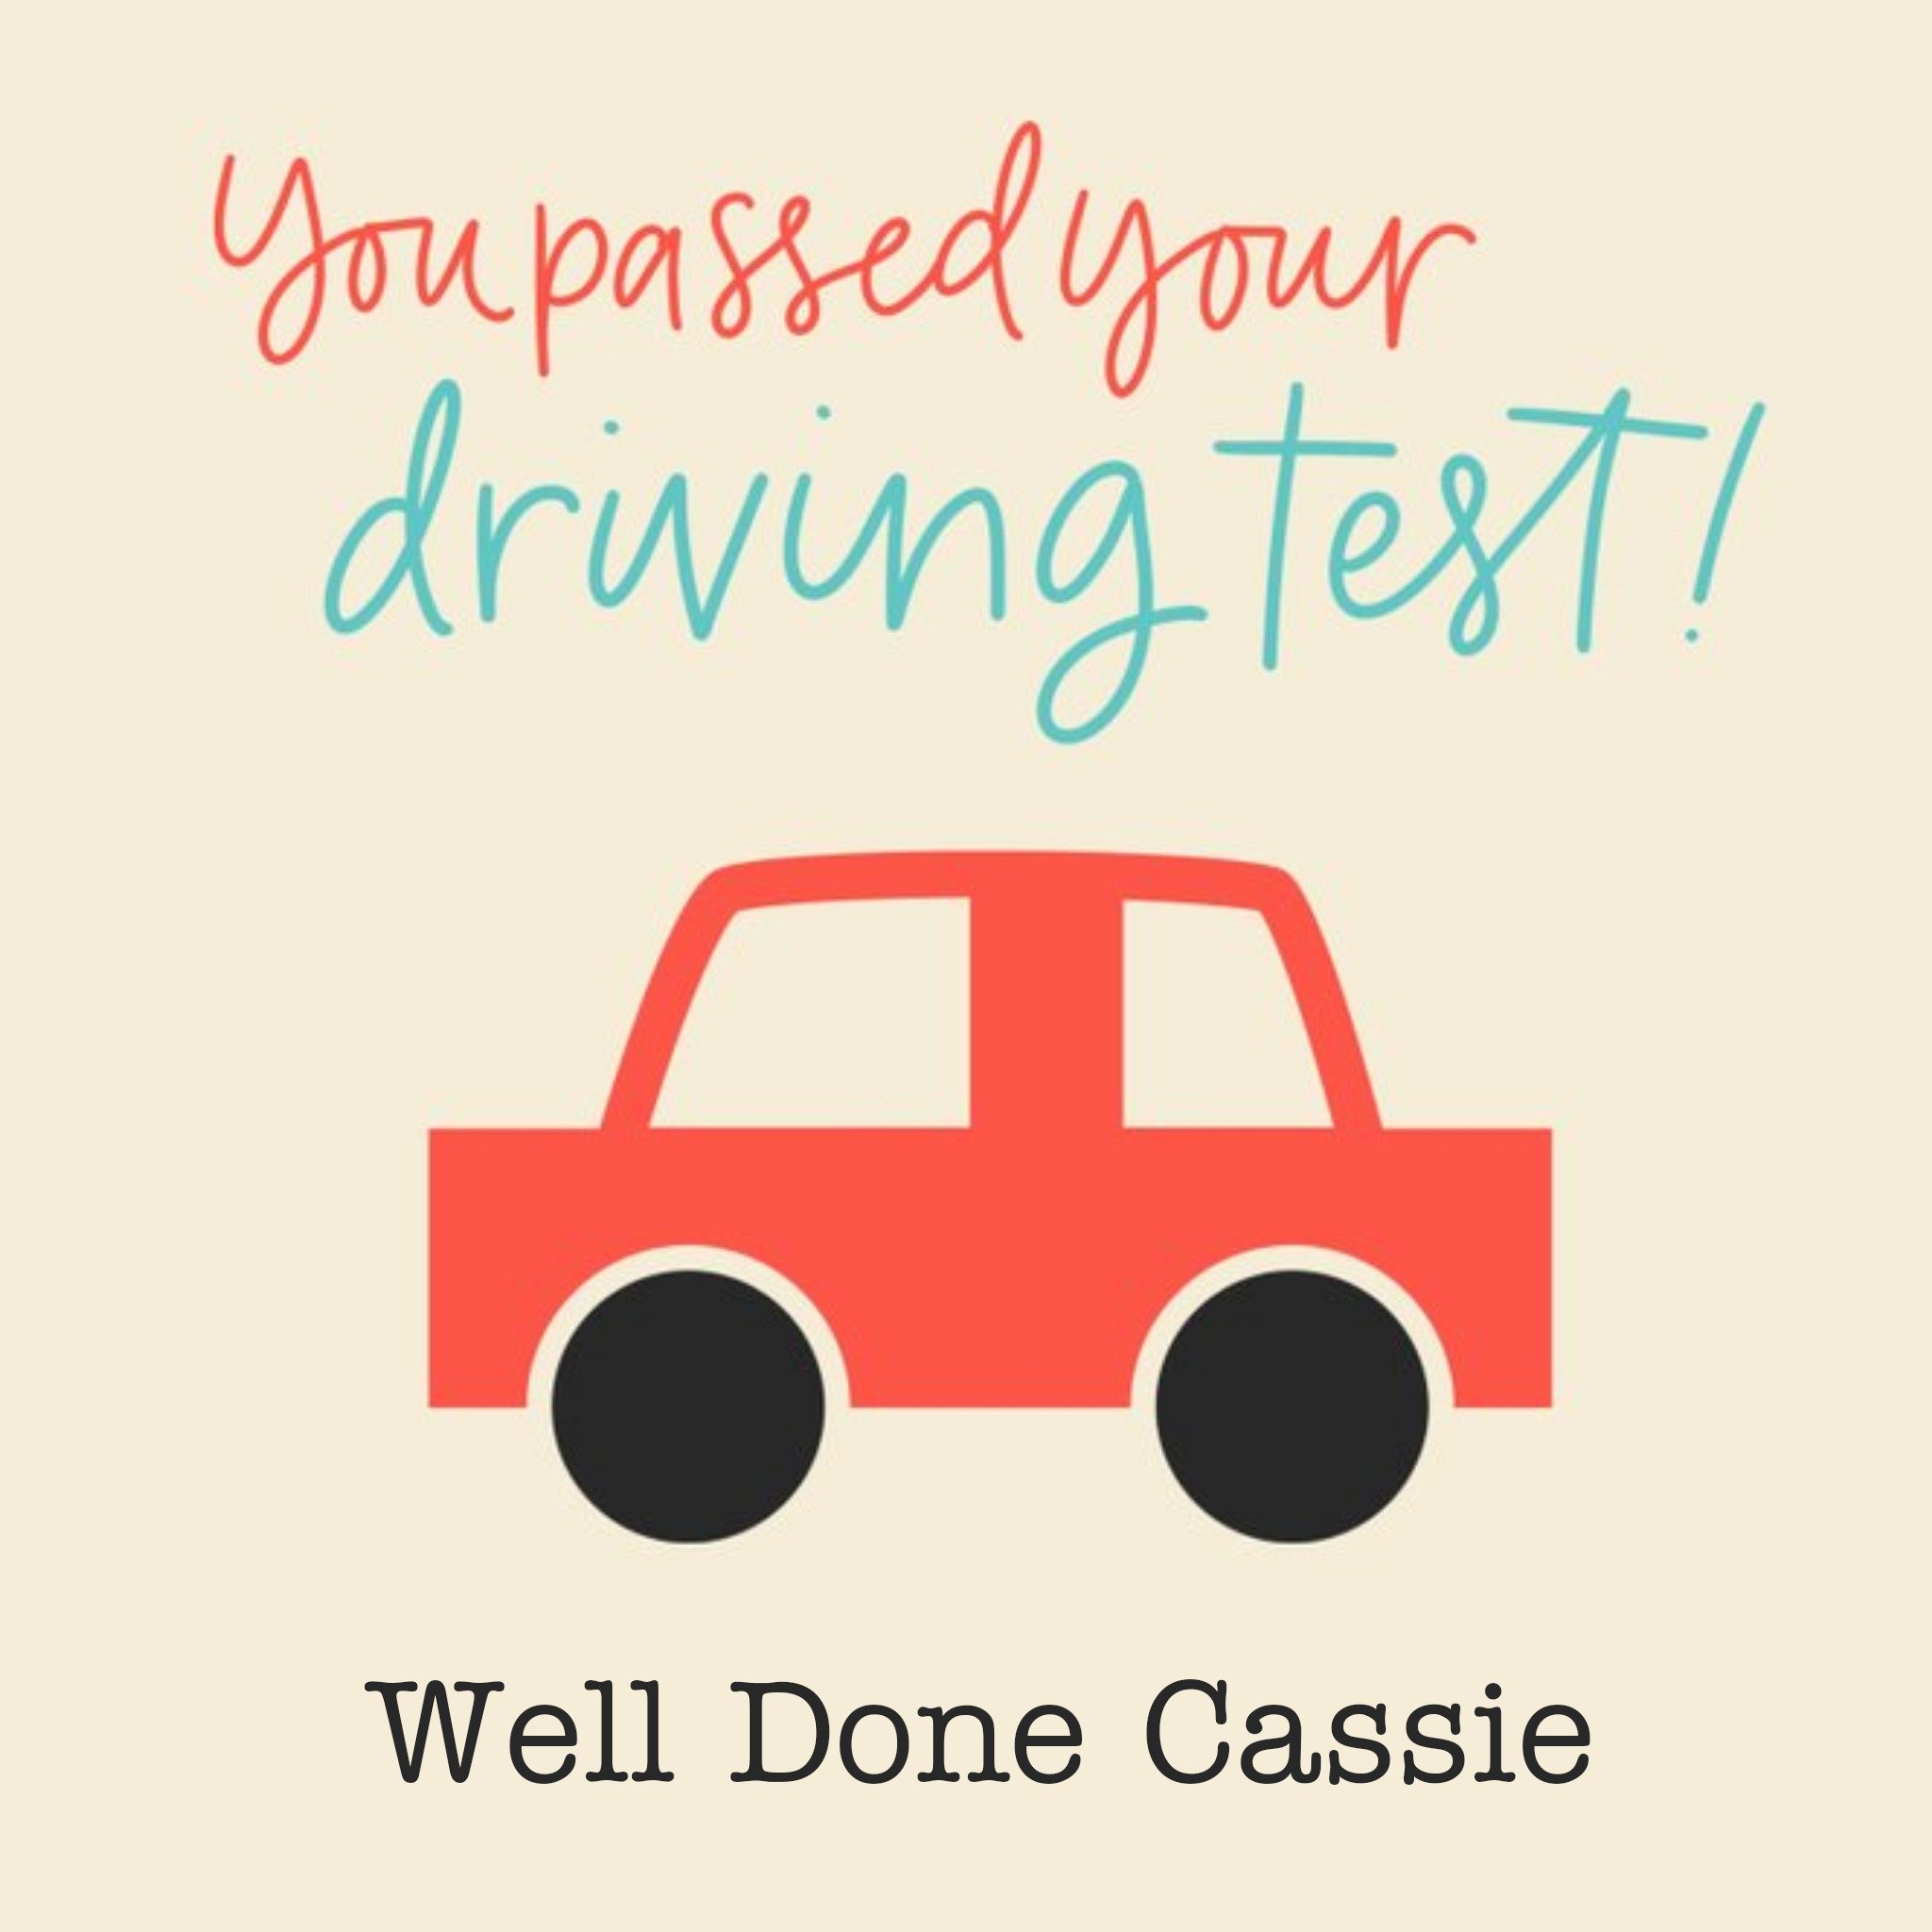 Moonpig Illustration Of A Red Car On A Cream Background Driving Test Congratulations Card, Large